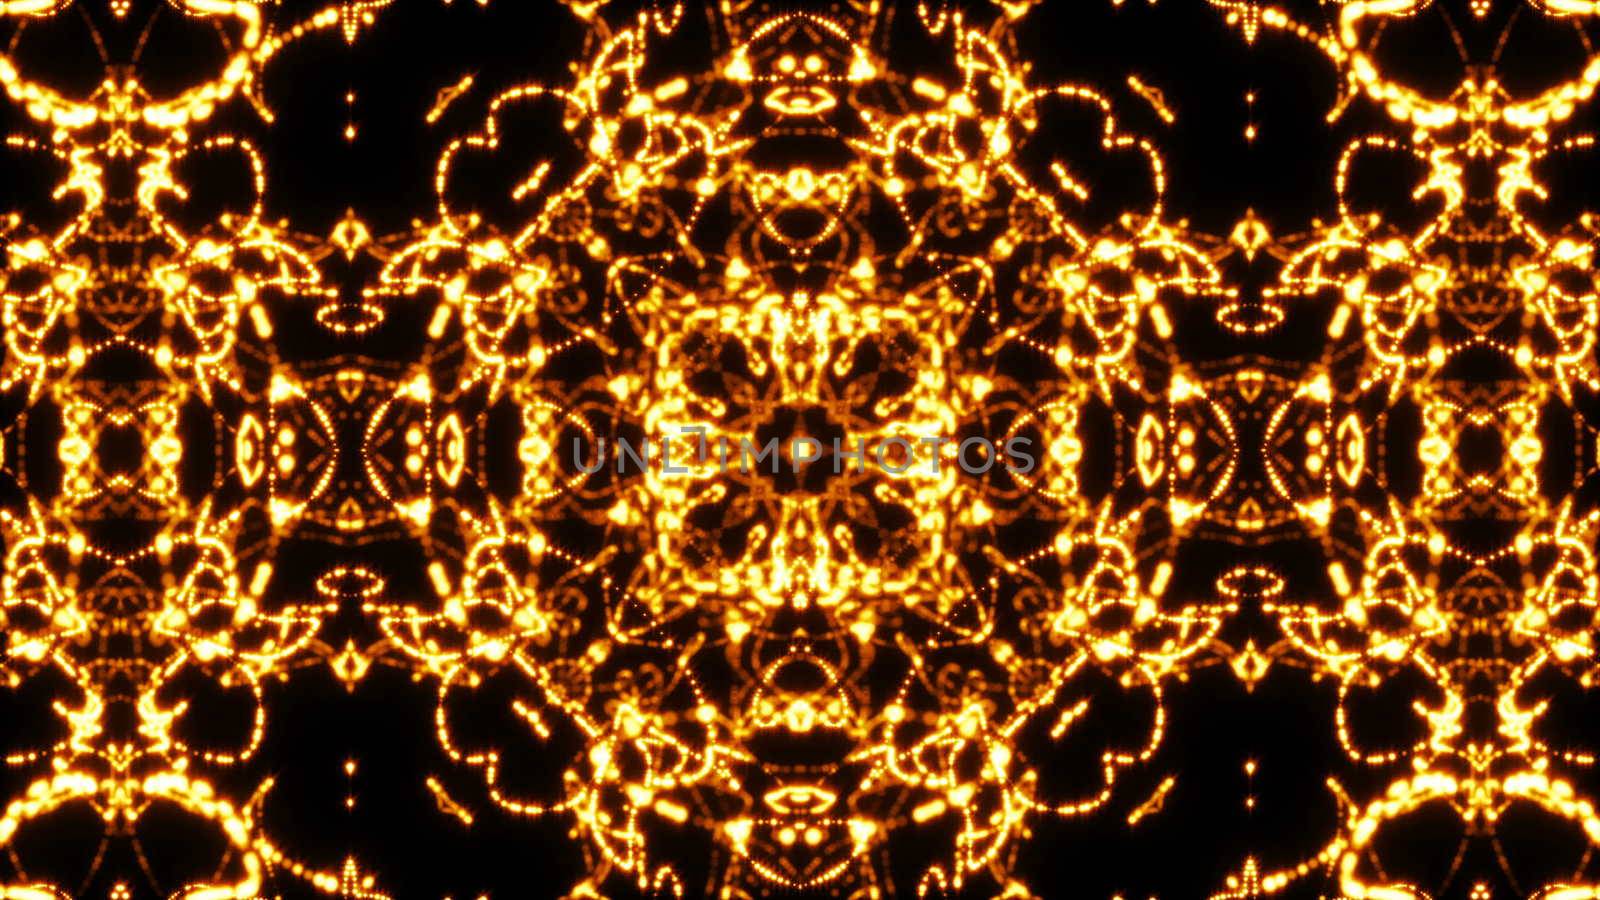 Looping kaleidoscope sequence. Abstract motion graphics background